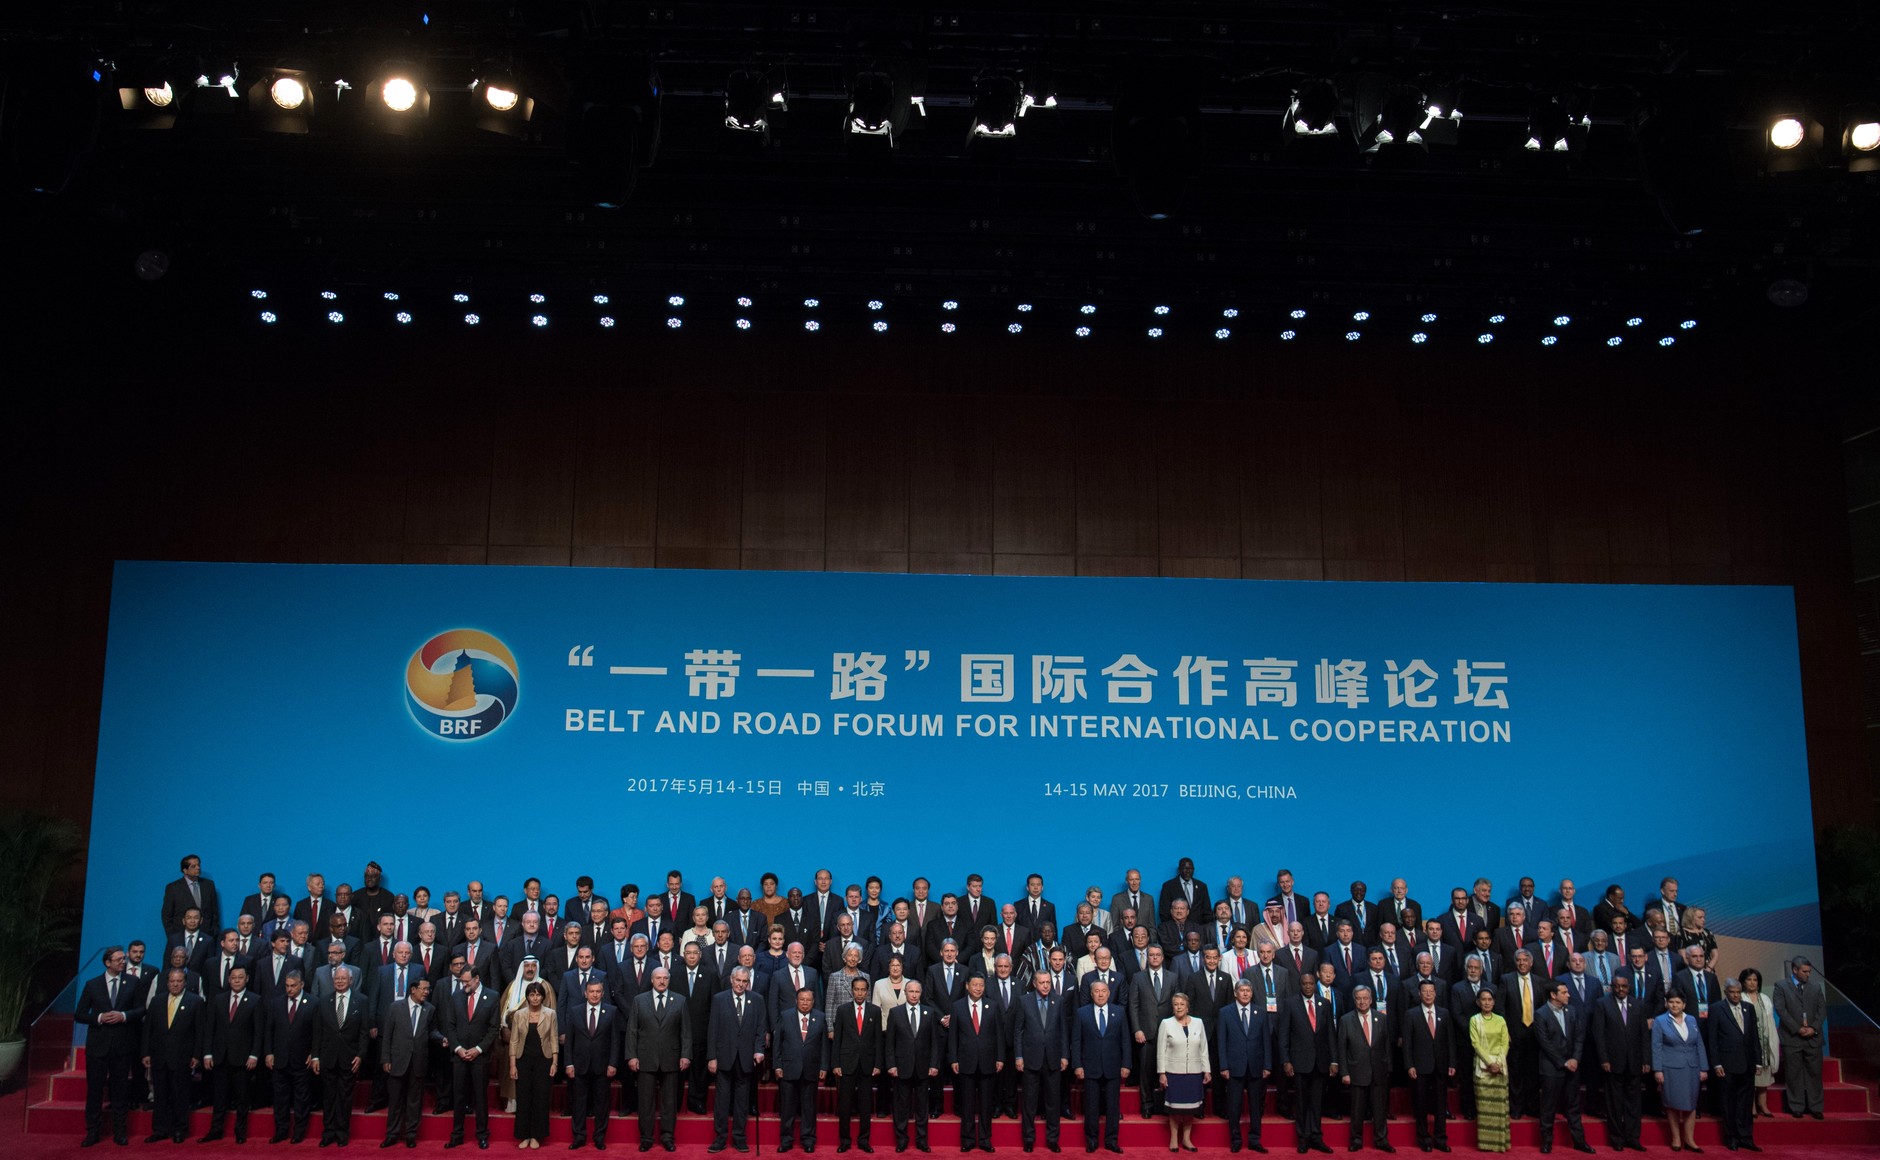 Before_the_beginning_of_the_Belt_and_Road_international_forum.jpg